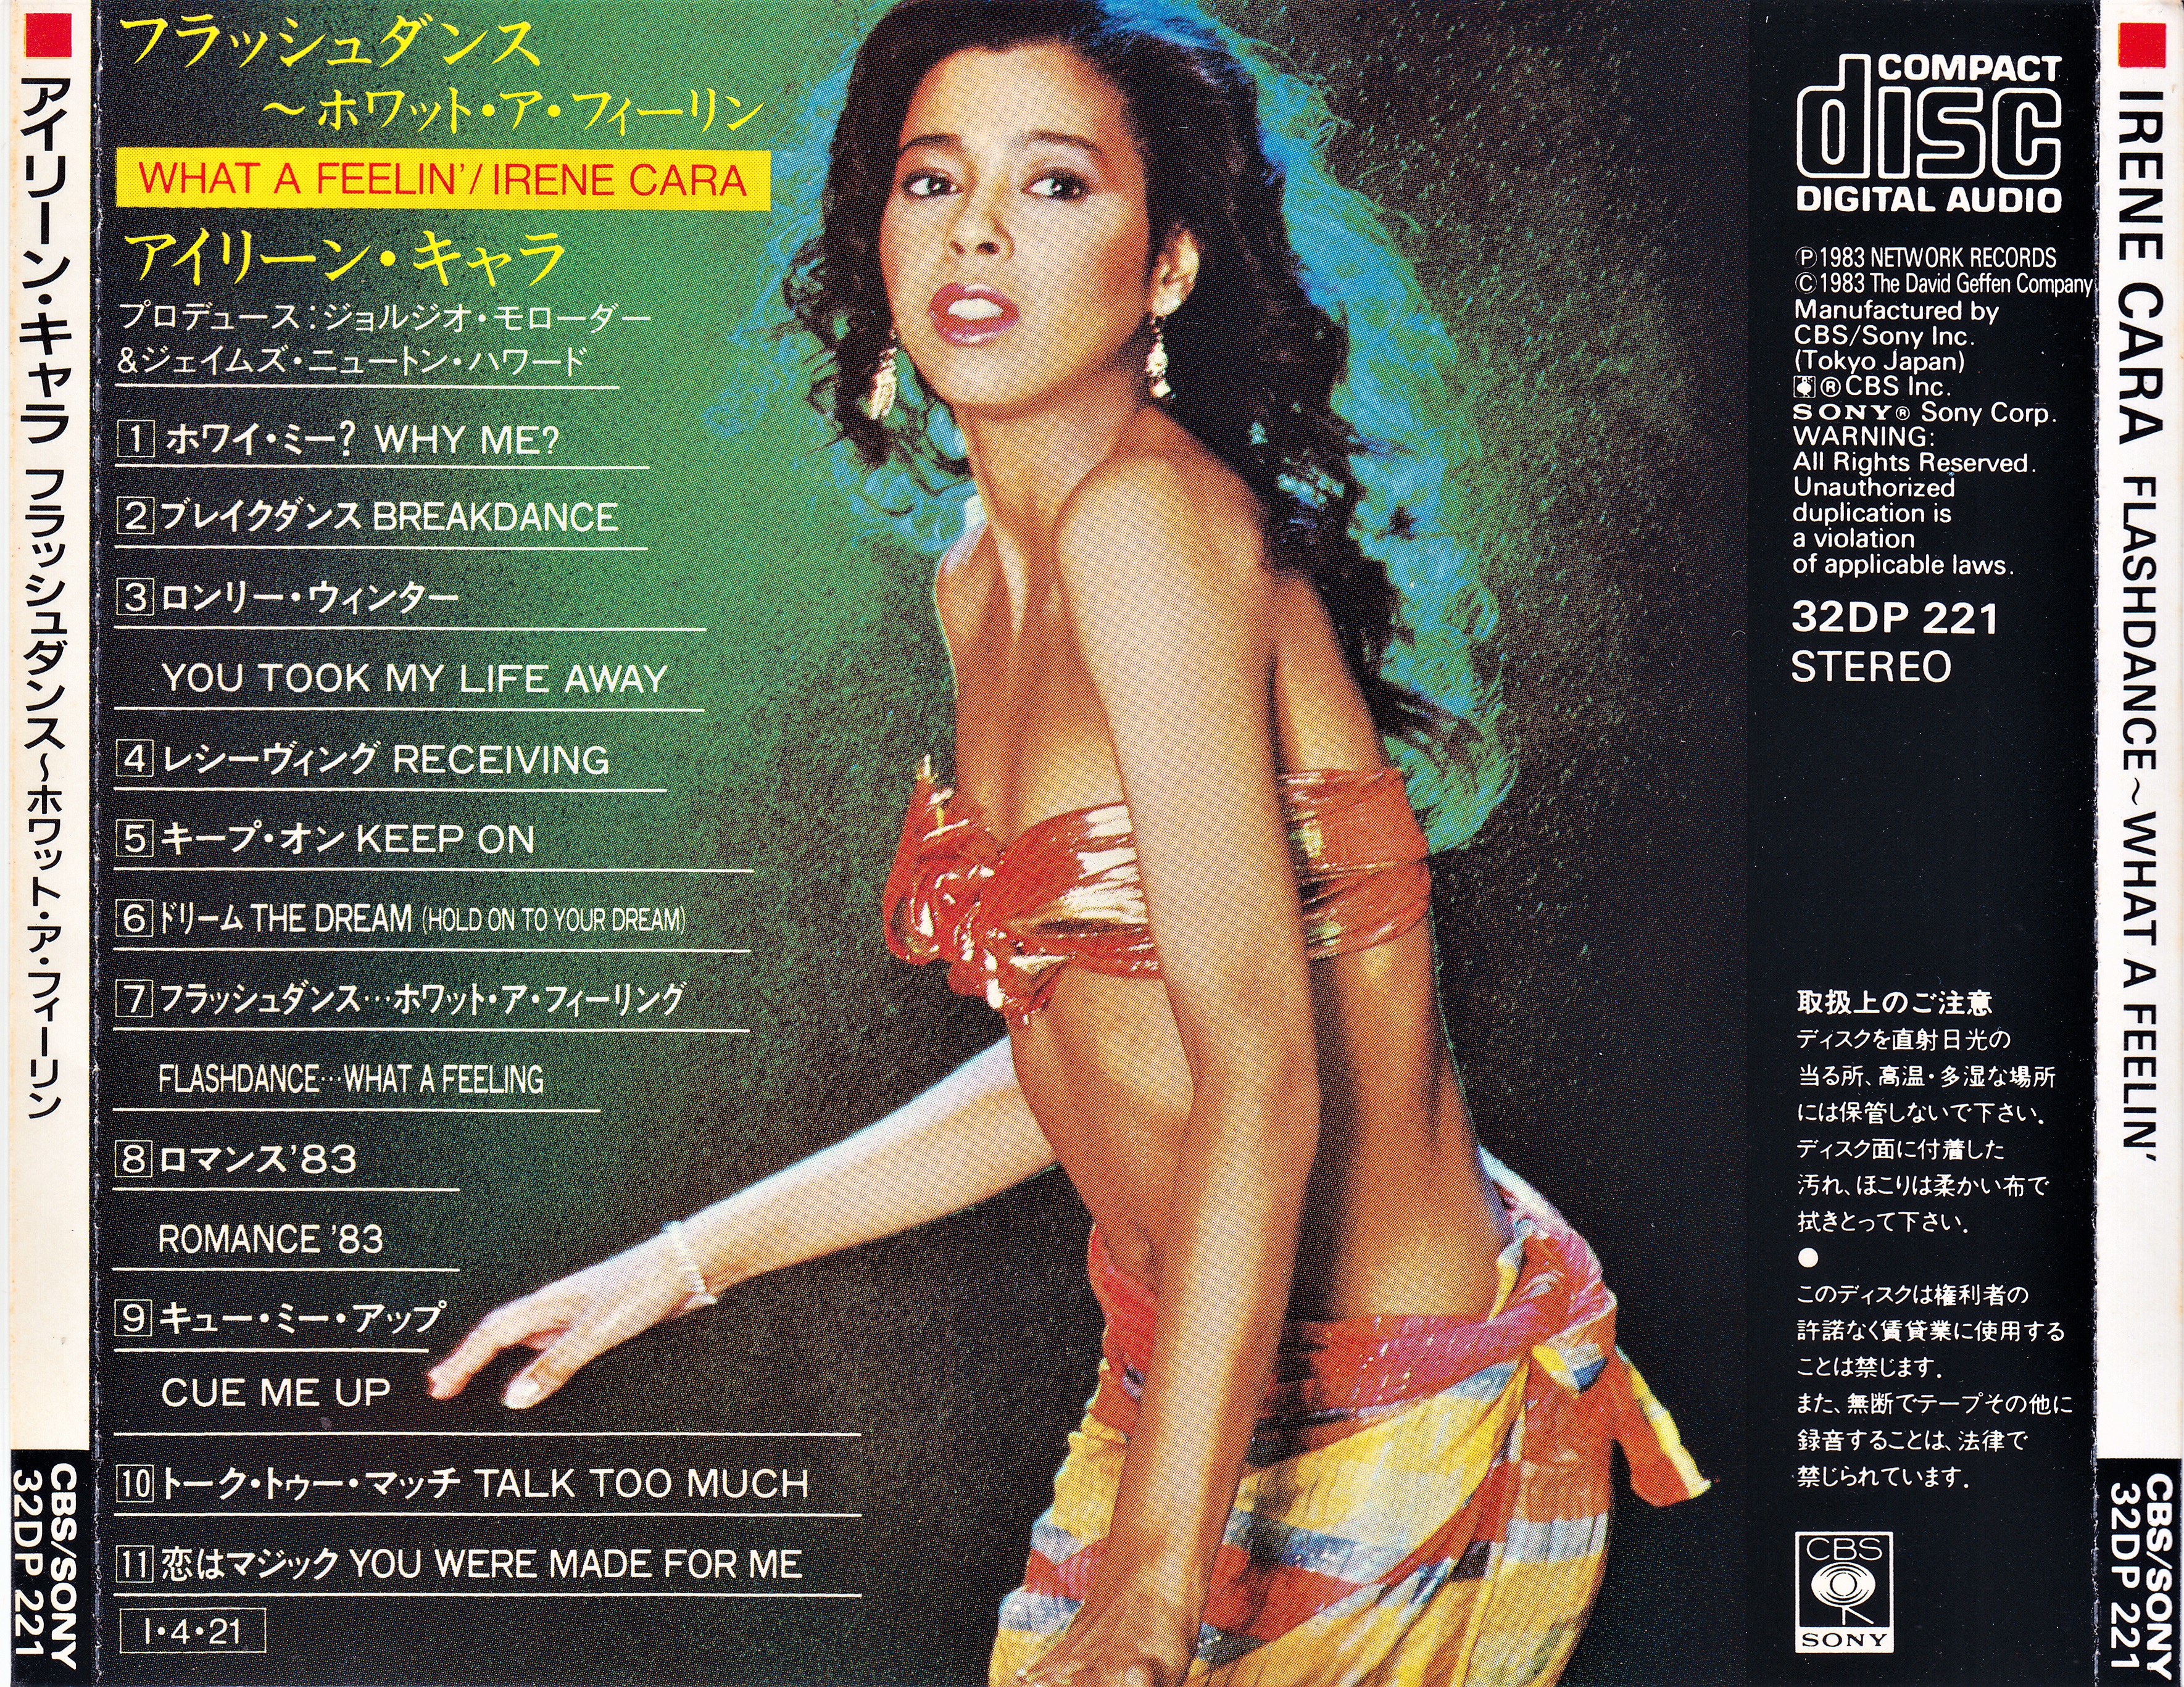 Is irene cara related to alessia cara